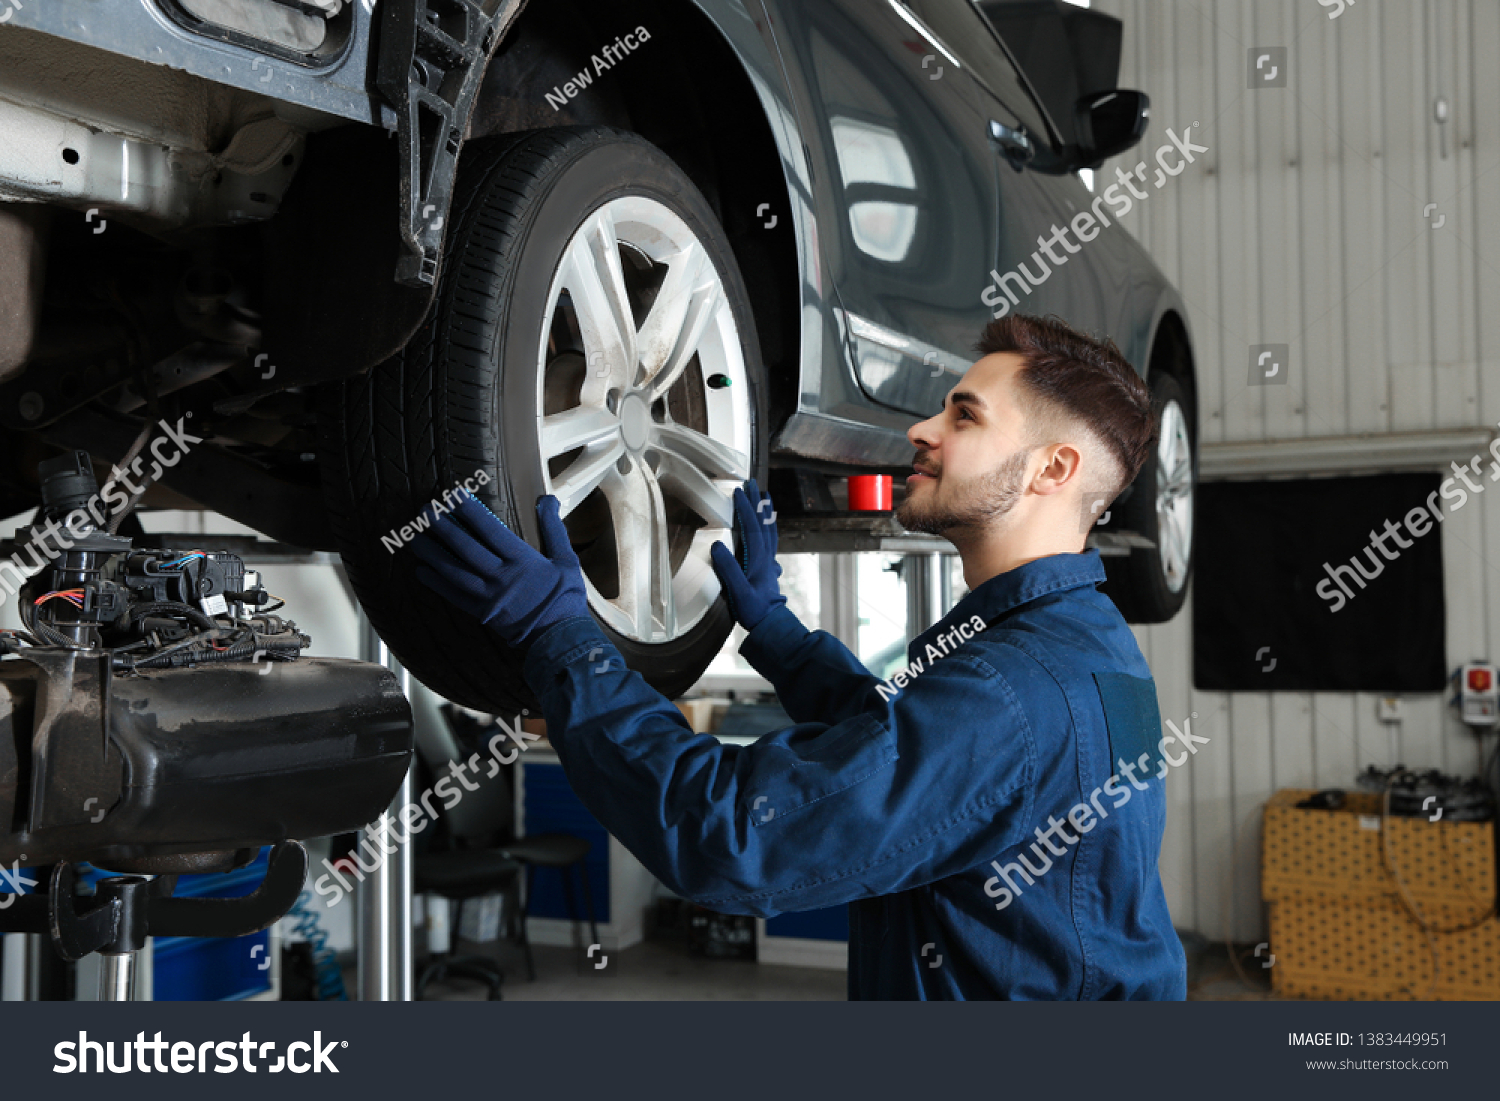 Technician checking car on hydraulic lift at automobile repair shop #1383449951